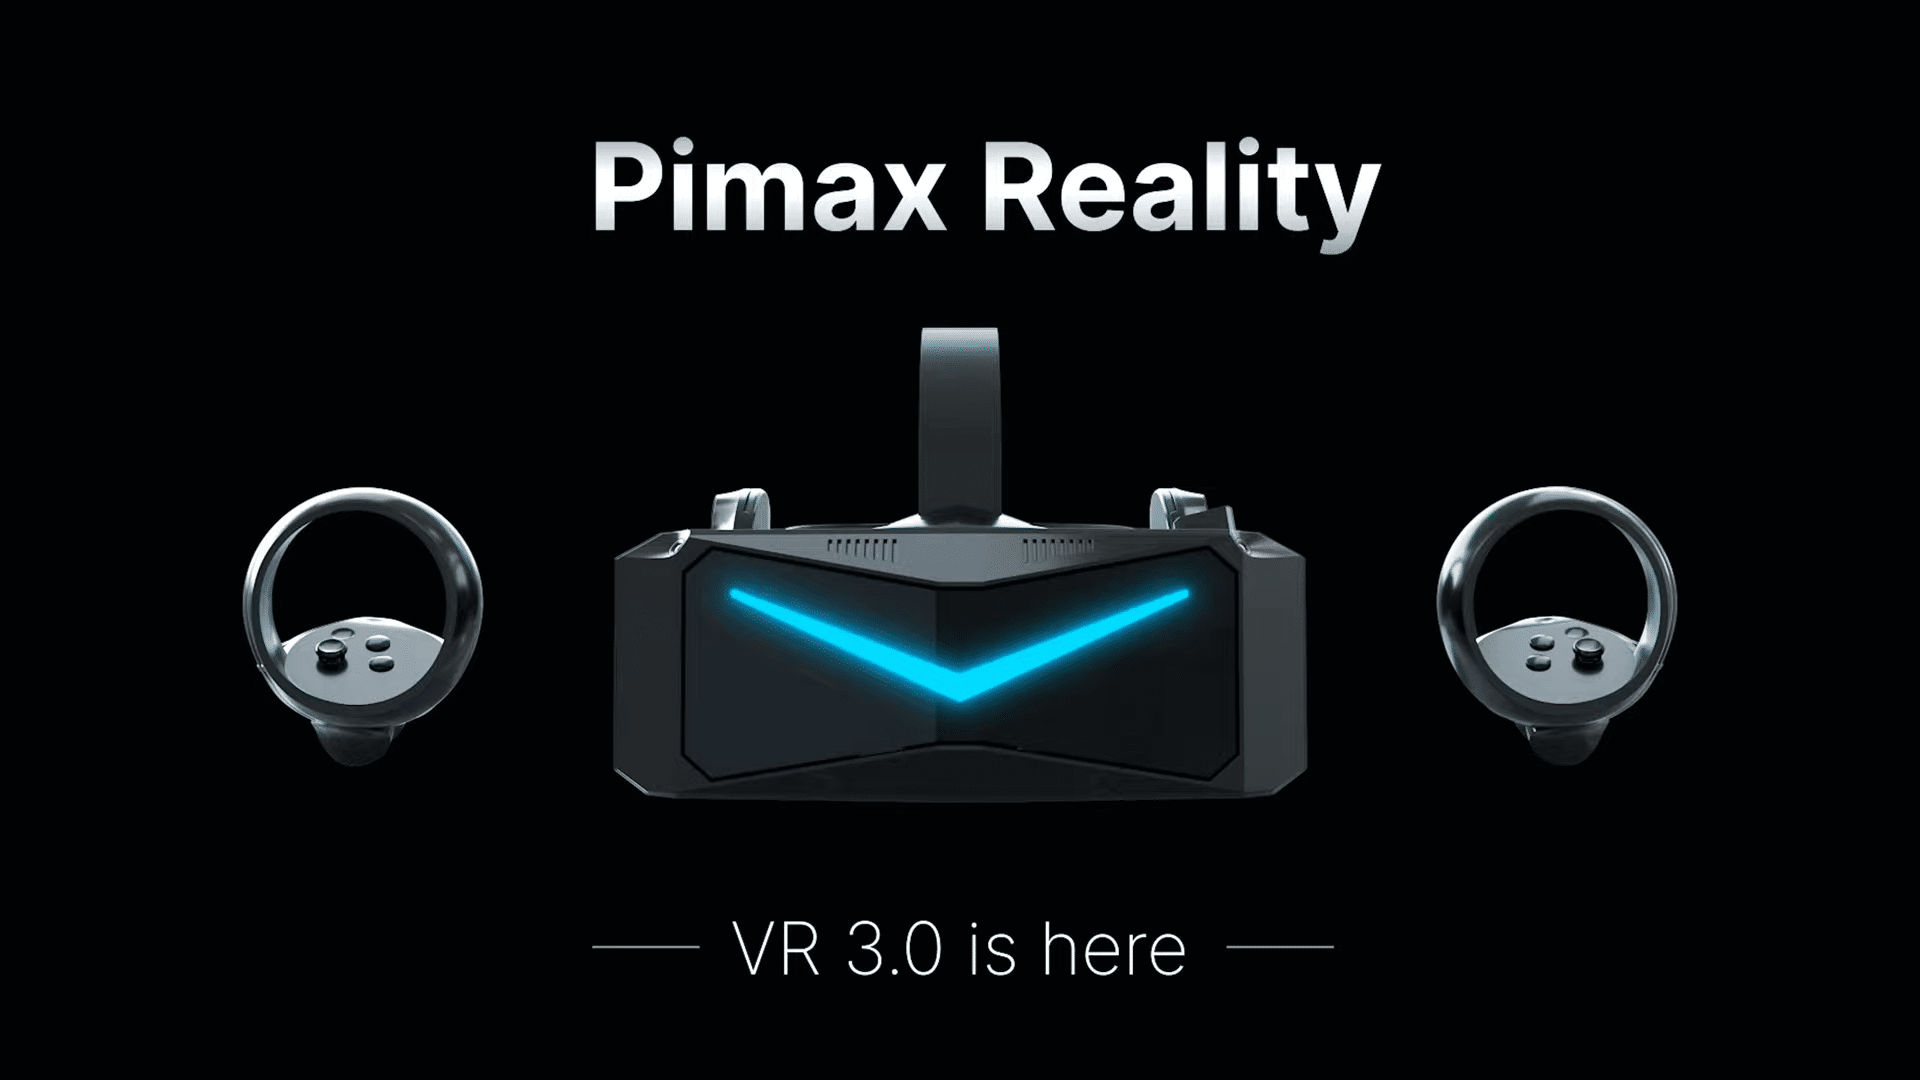 Pimax introduces Reality, a third generation standalone headset with 5.7K per eye and a 200° field of view.